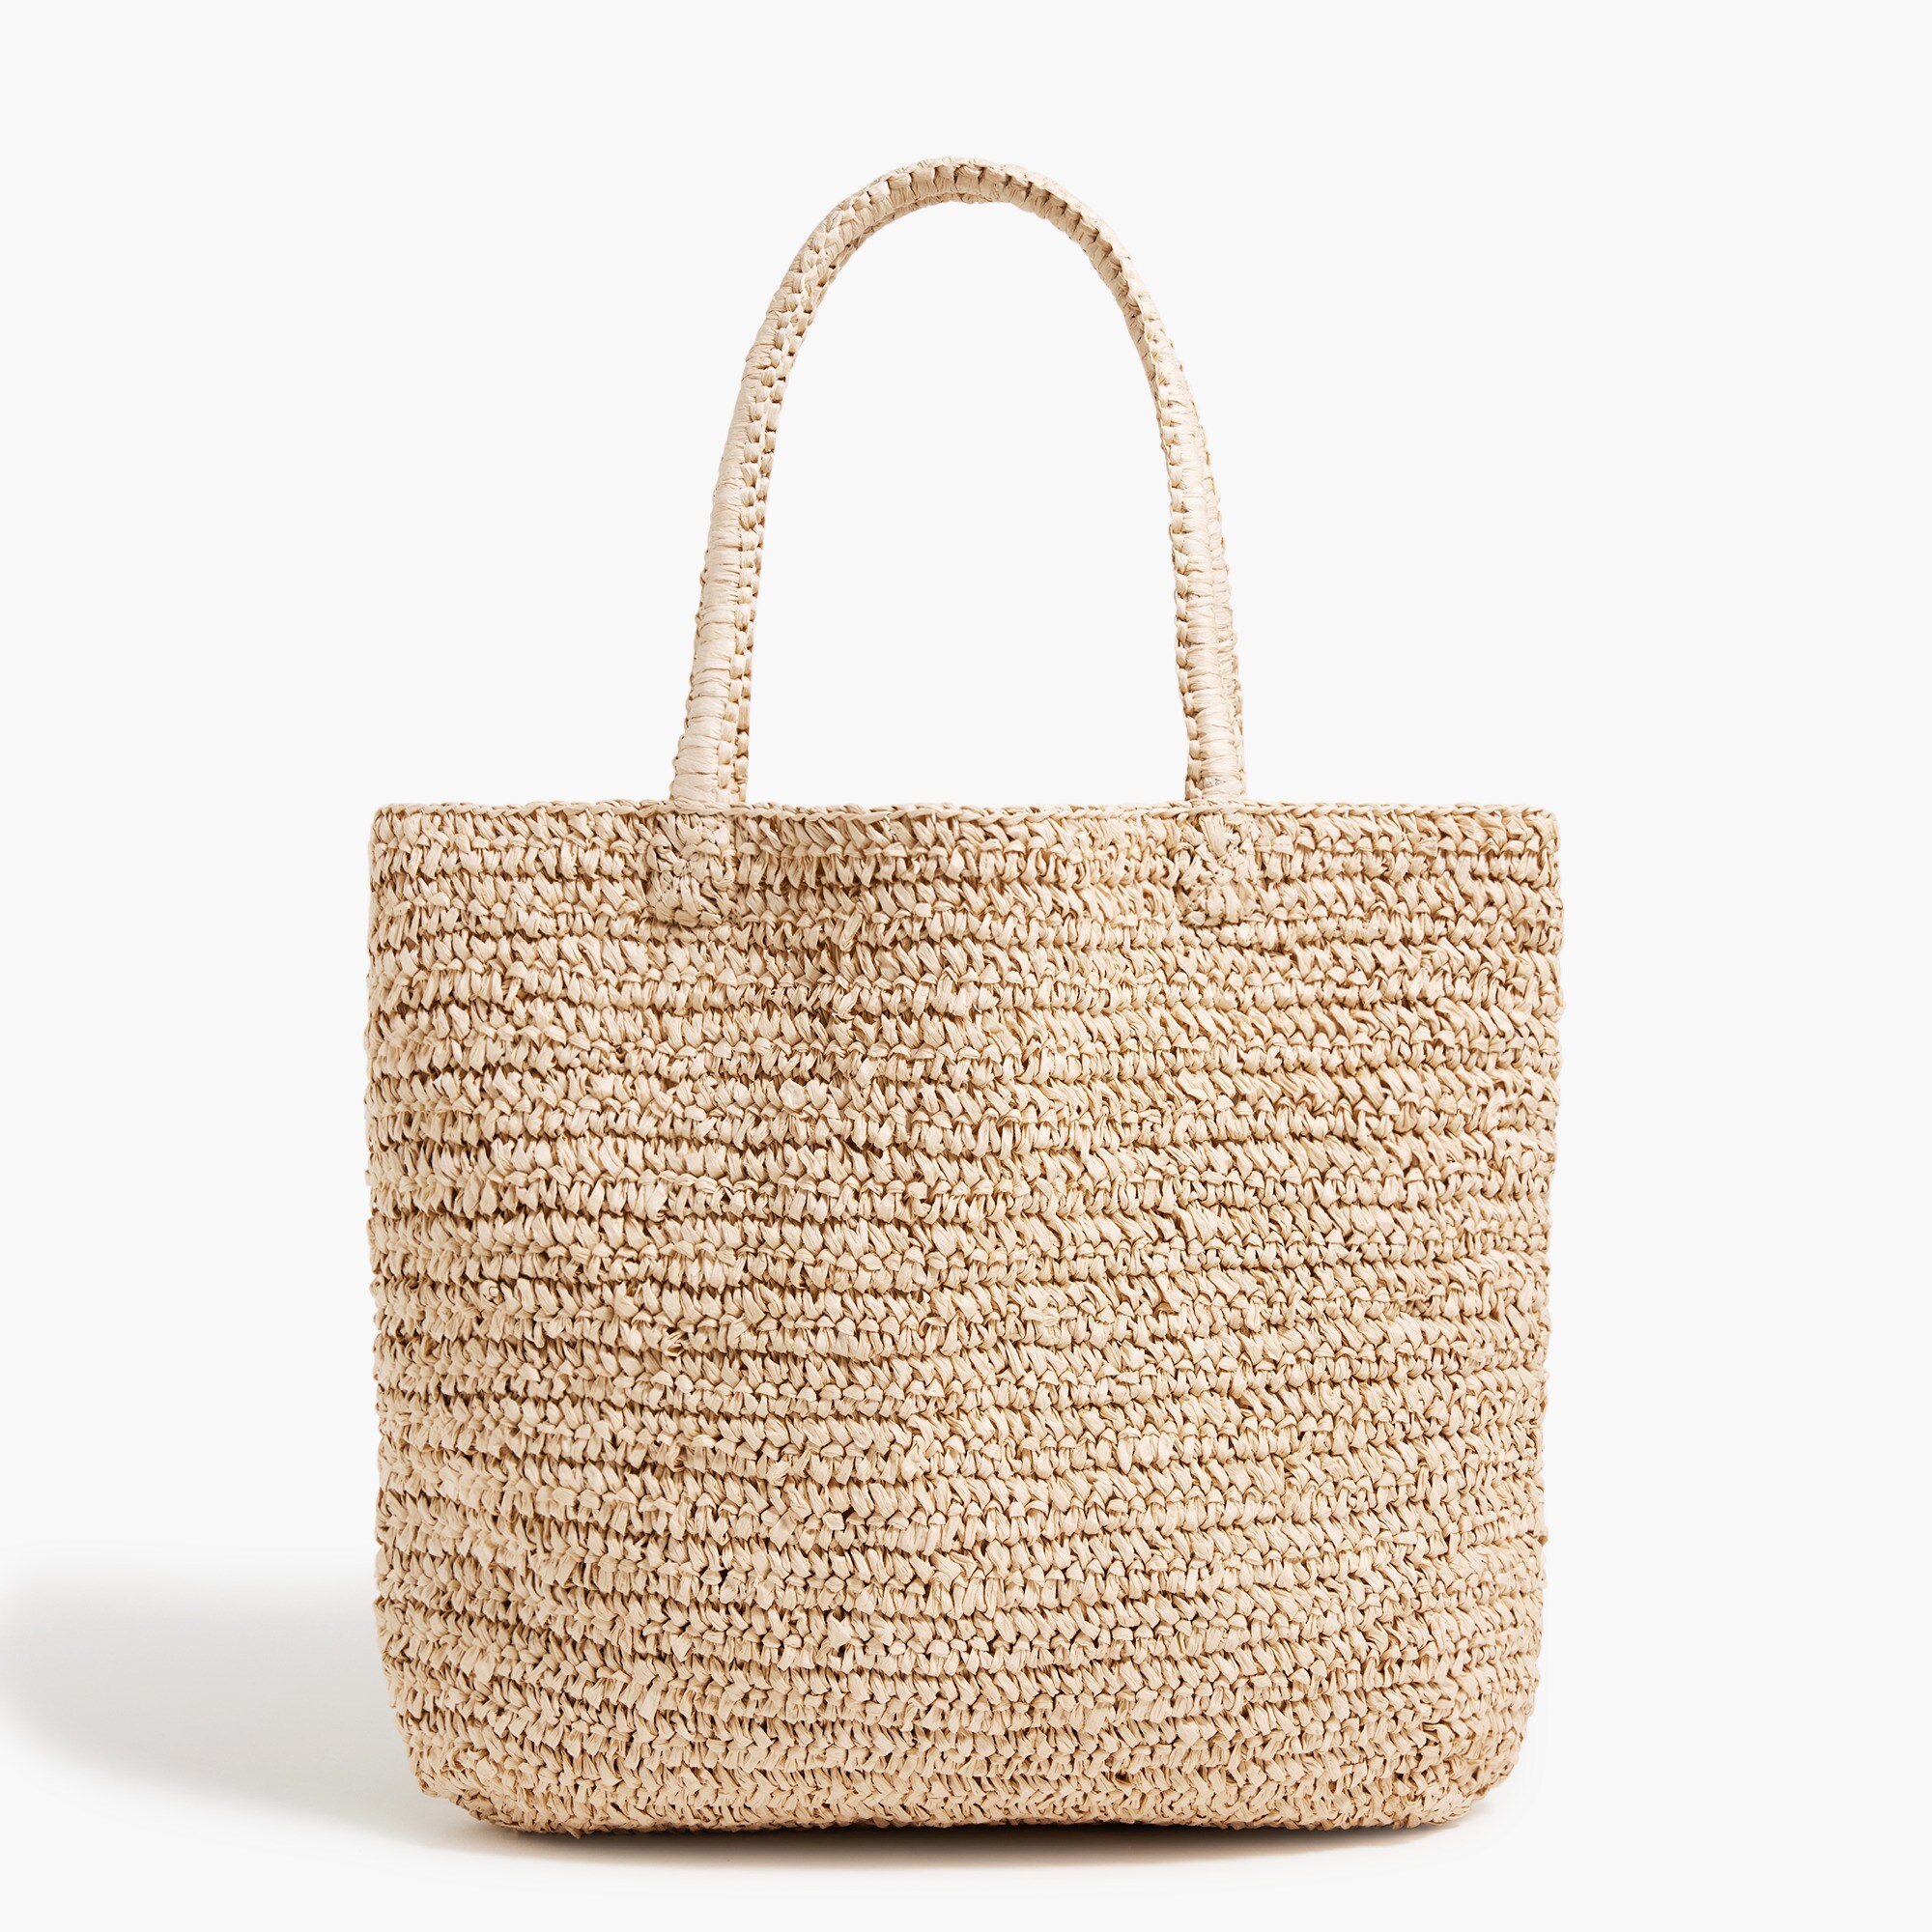  Packable straw tote bag